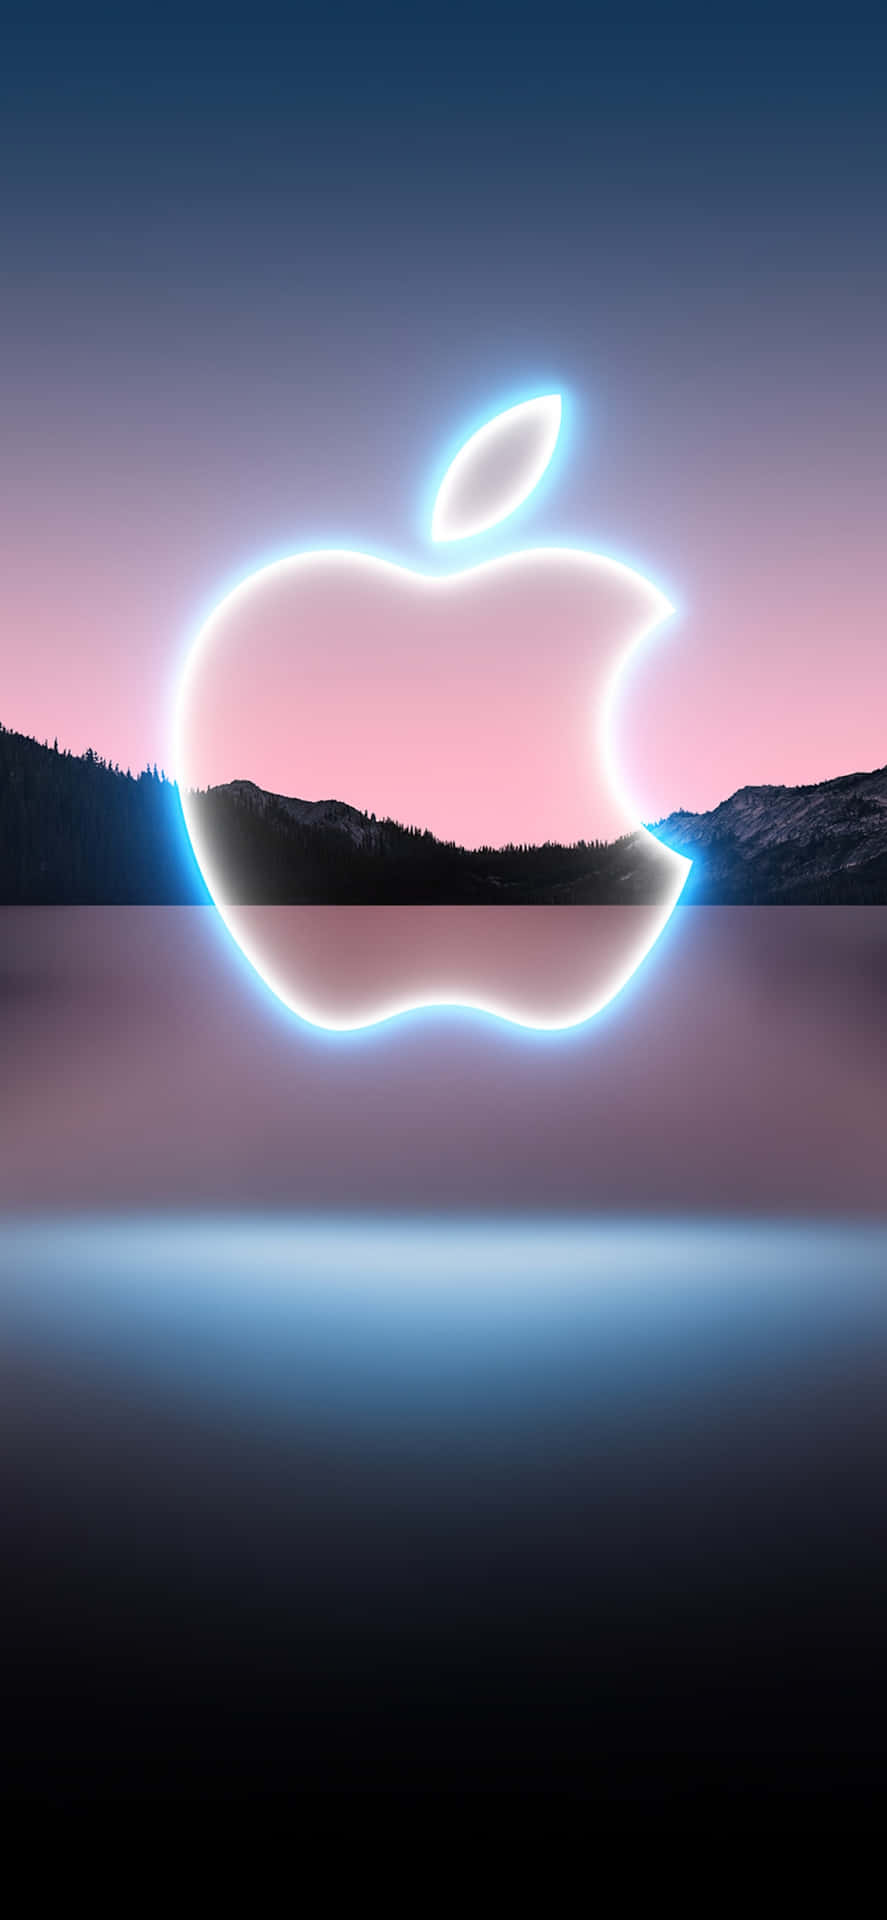 Apple's Iconic iPhone X with Logo Wallpaper